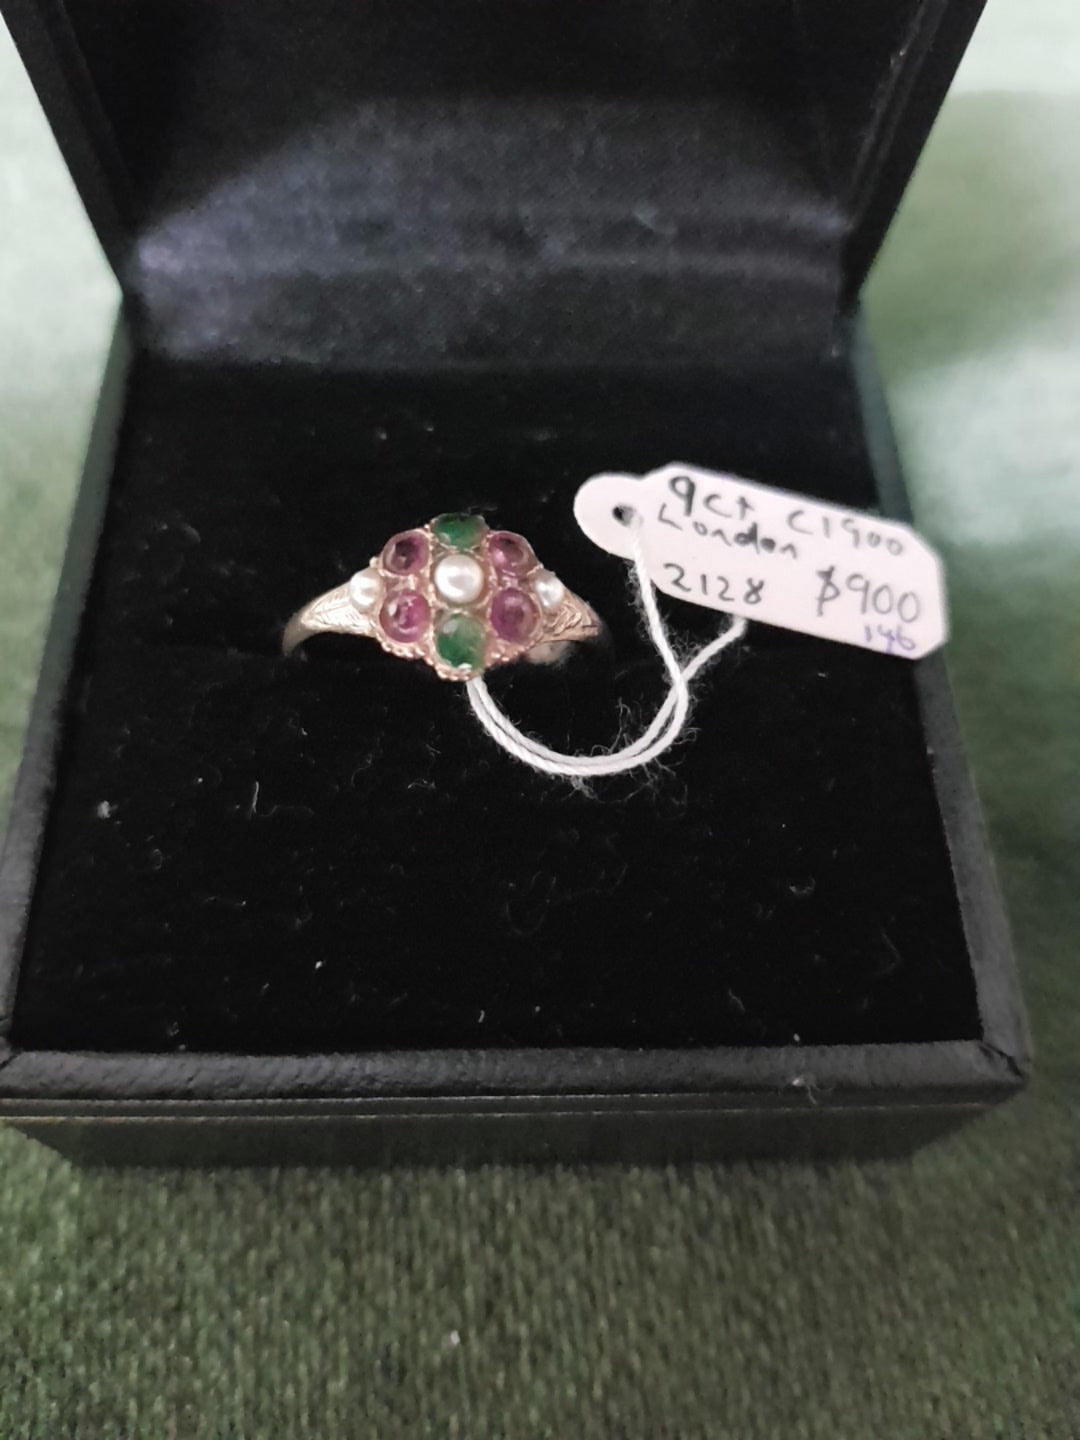 c1900 London 9ct Gold, Garnets, Pearls and Emeralds ring #146